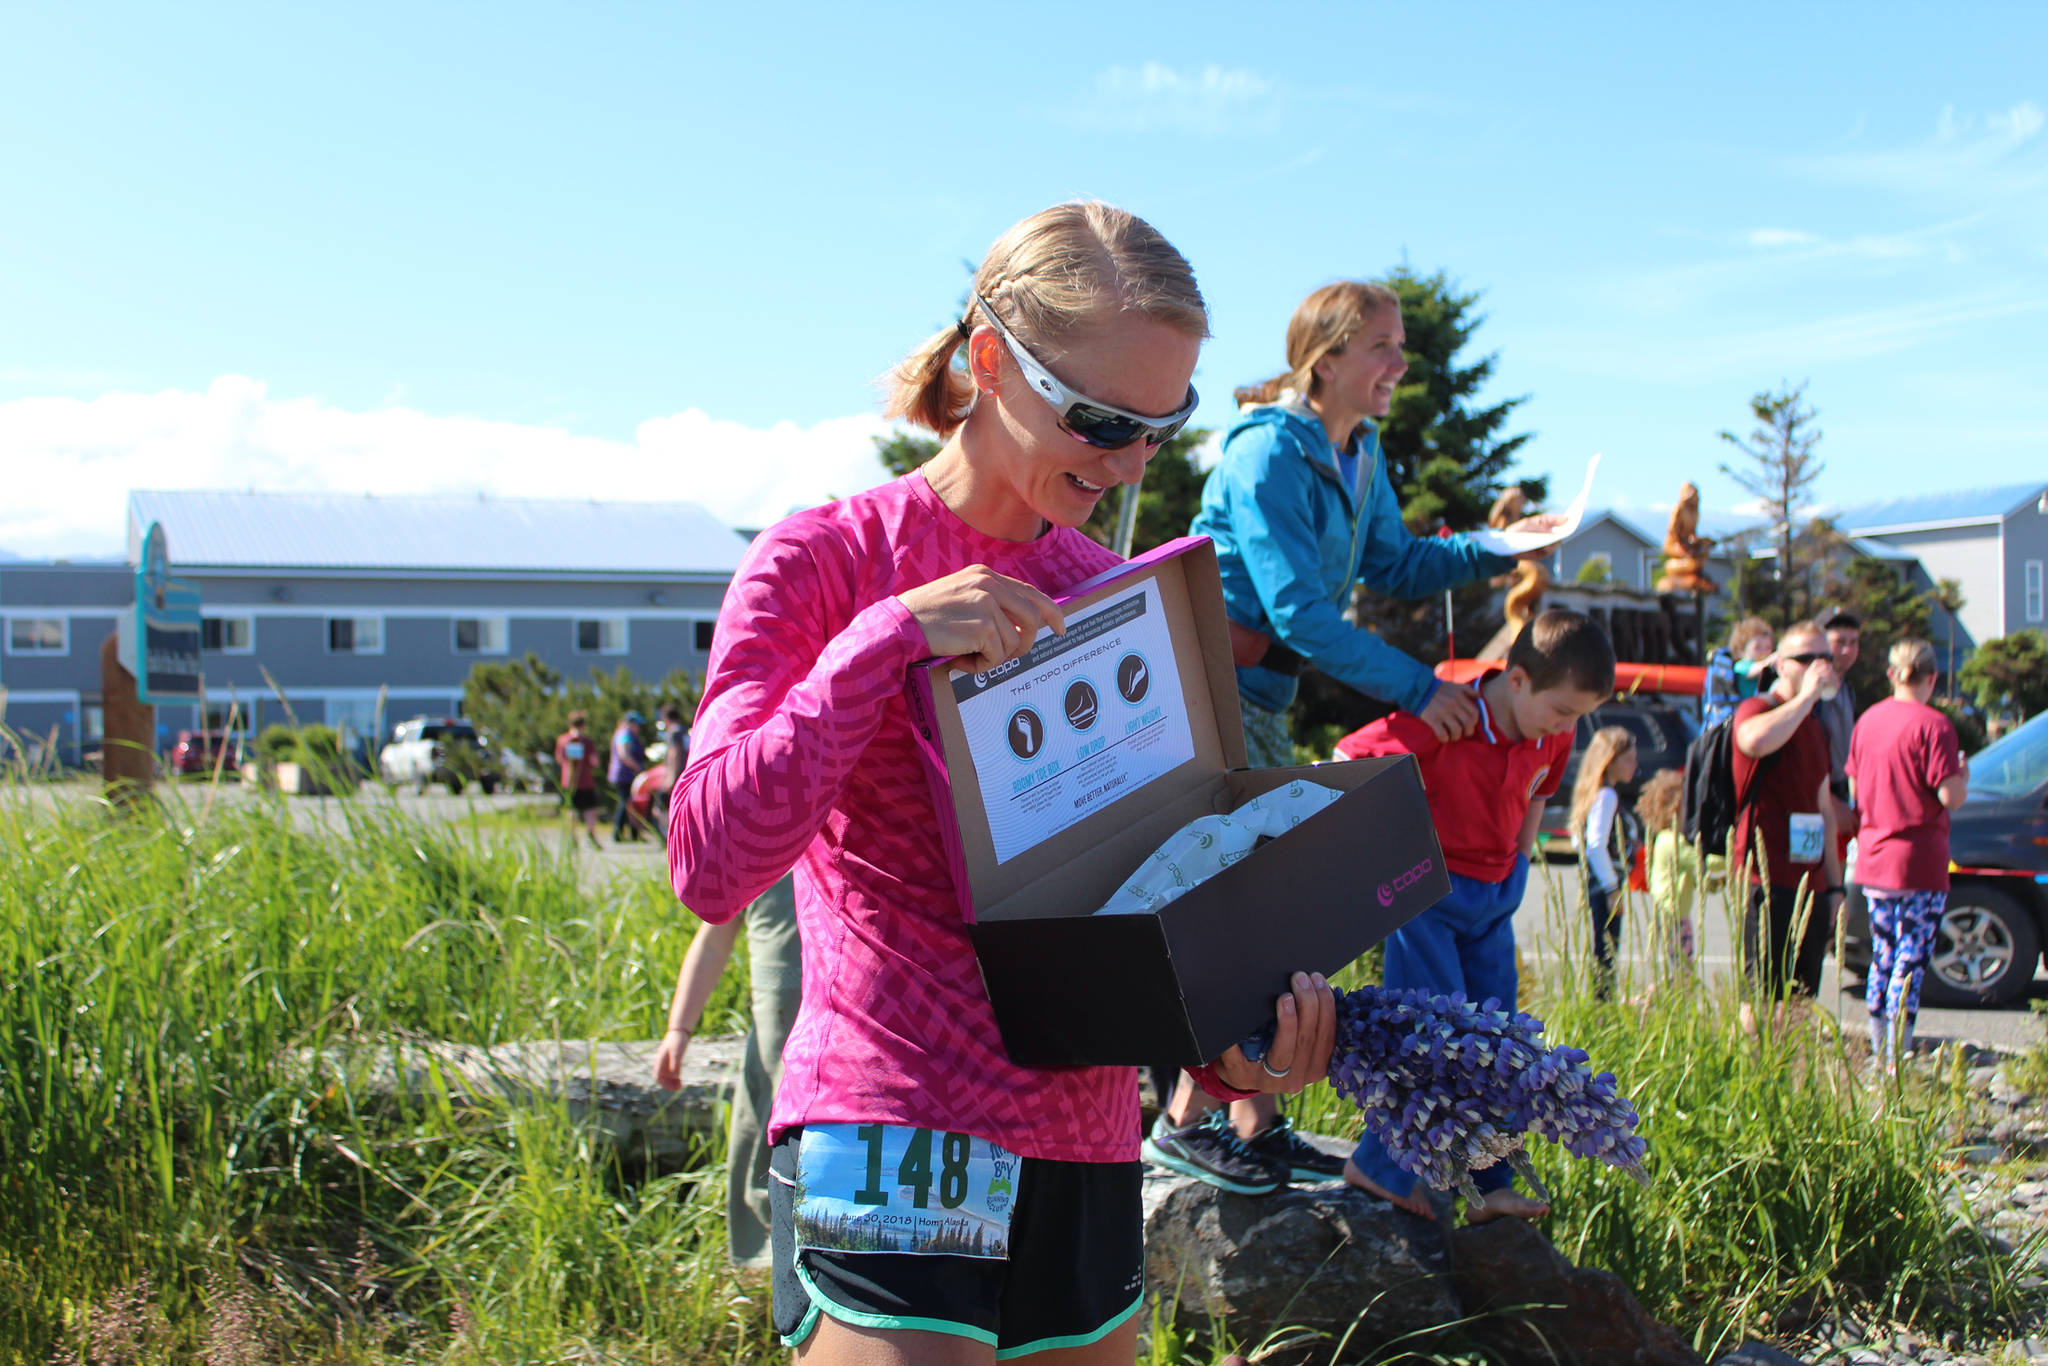 <span class="neFMT neFMT_PhotoCredit">Photo by Megan Pacer/Homer News</span>                                Heidi Bock, of Texas, looks inside a shoebox at her prize for taking first place in the Cosmic Hamlet Half Marathon for the women Saturday, June 30 during the Homer Spit Run at Land’s End Resort in Homer. Winners were appropriately gifted a pair of running shoes.